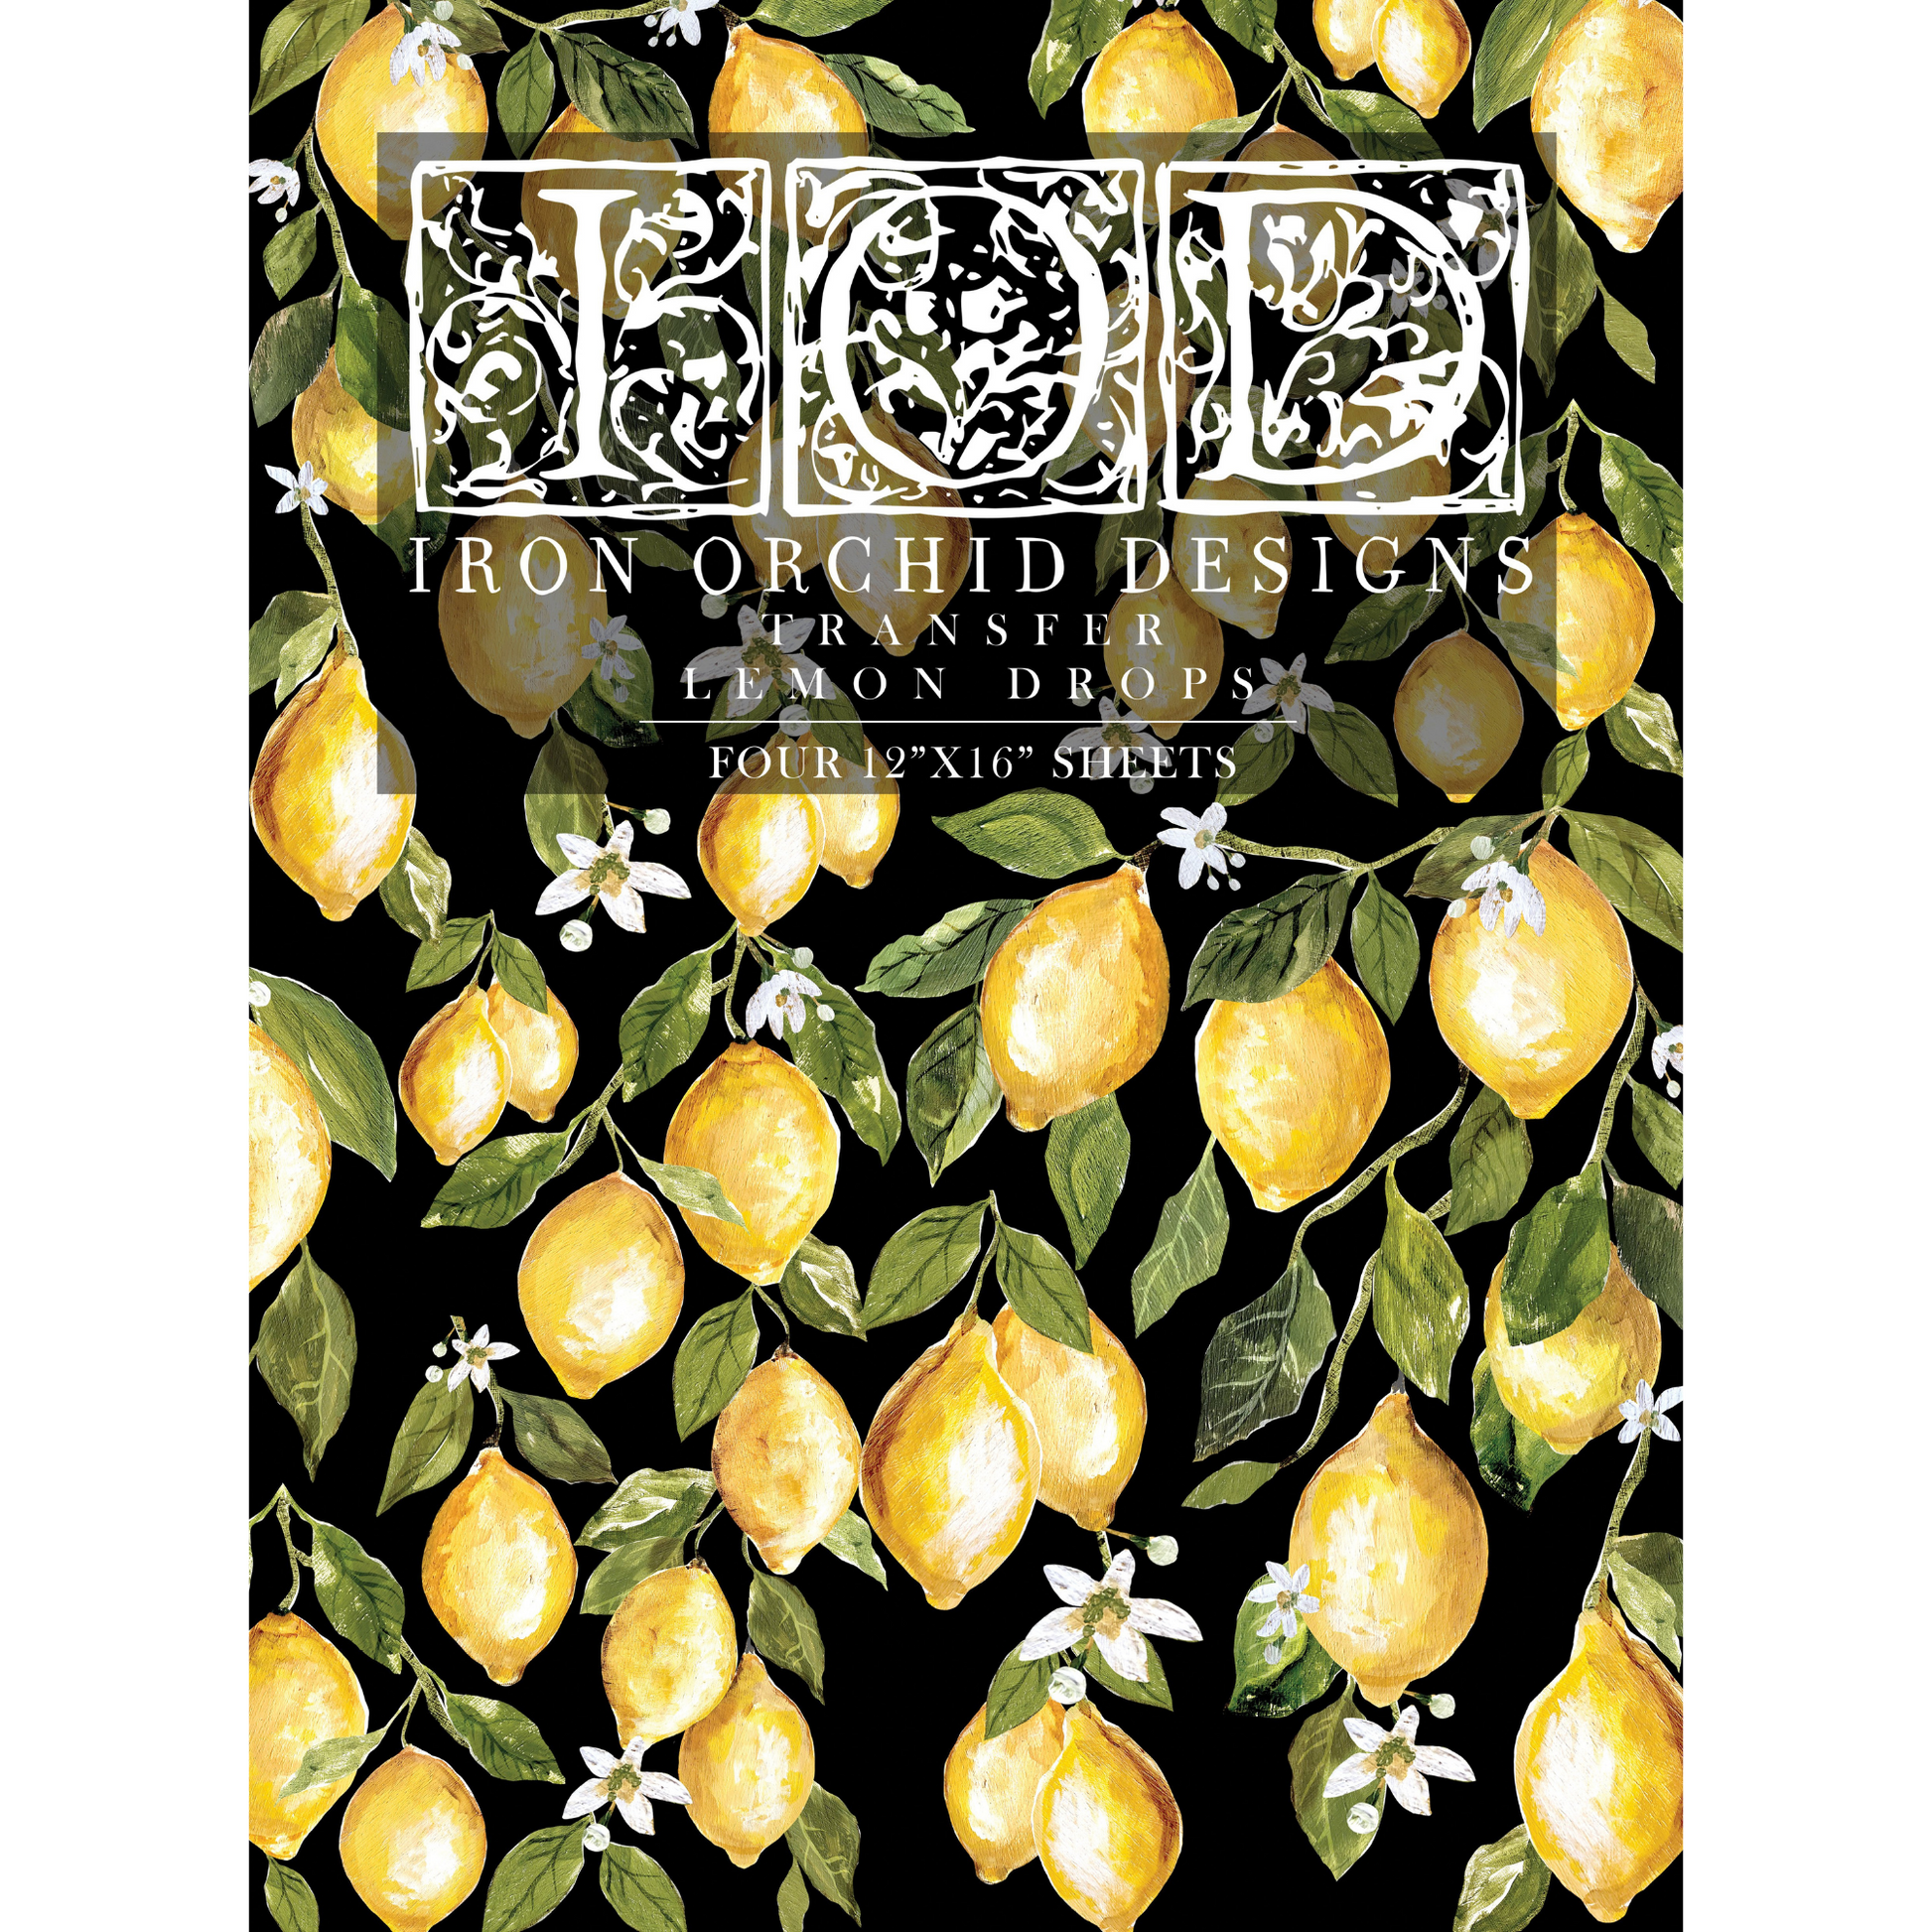 Lemon Drops Transfer by IOD front cover product photo-Bright yellow lemons and green leaves with buildable vines at Milton's Daughter.